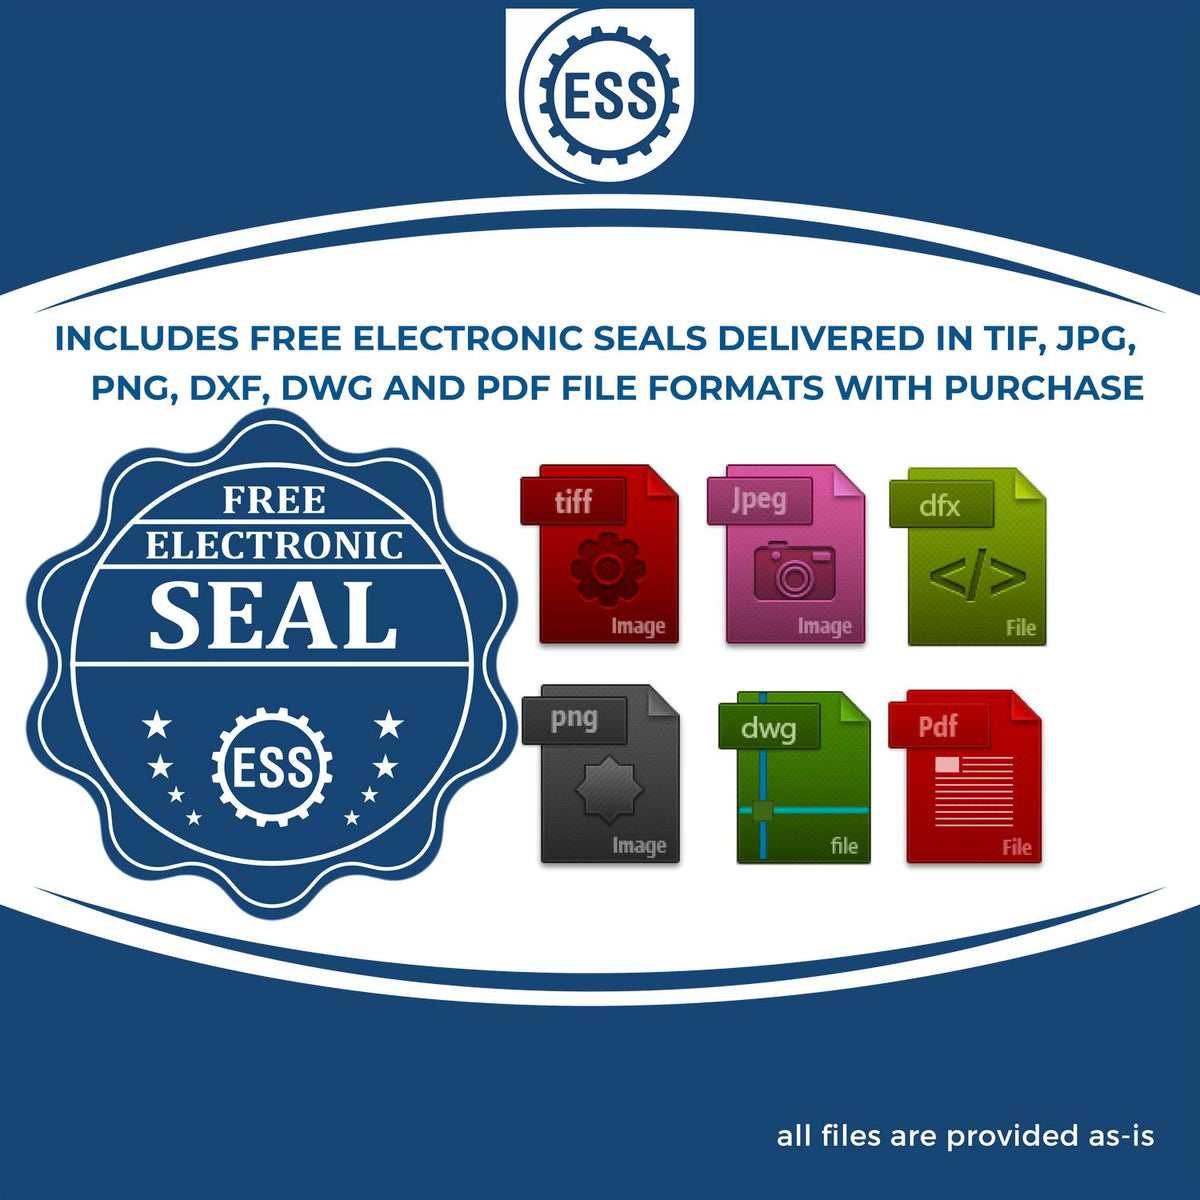 An infographic for the free electronic seal for the Self-Inking Colorado PE Stamp illustrating the different file type icons such as DXF, DWG, TIF, JPG and PNG.